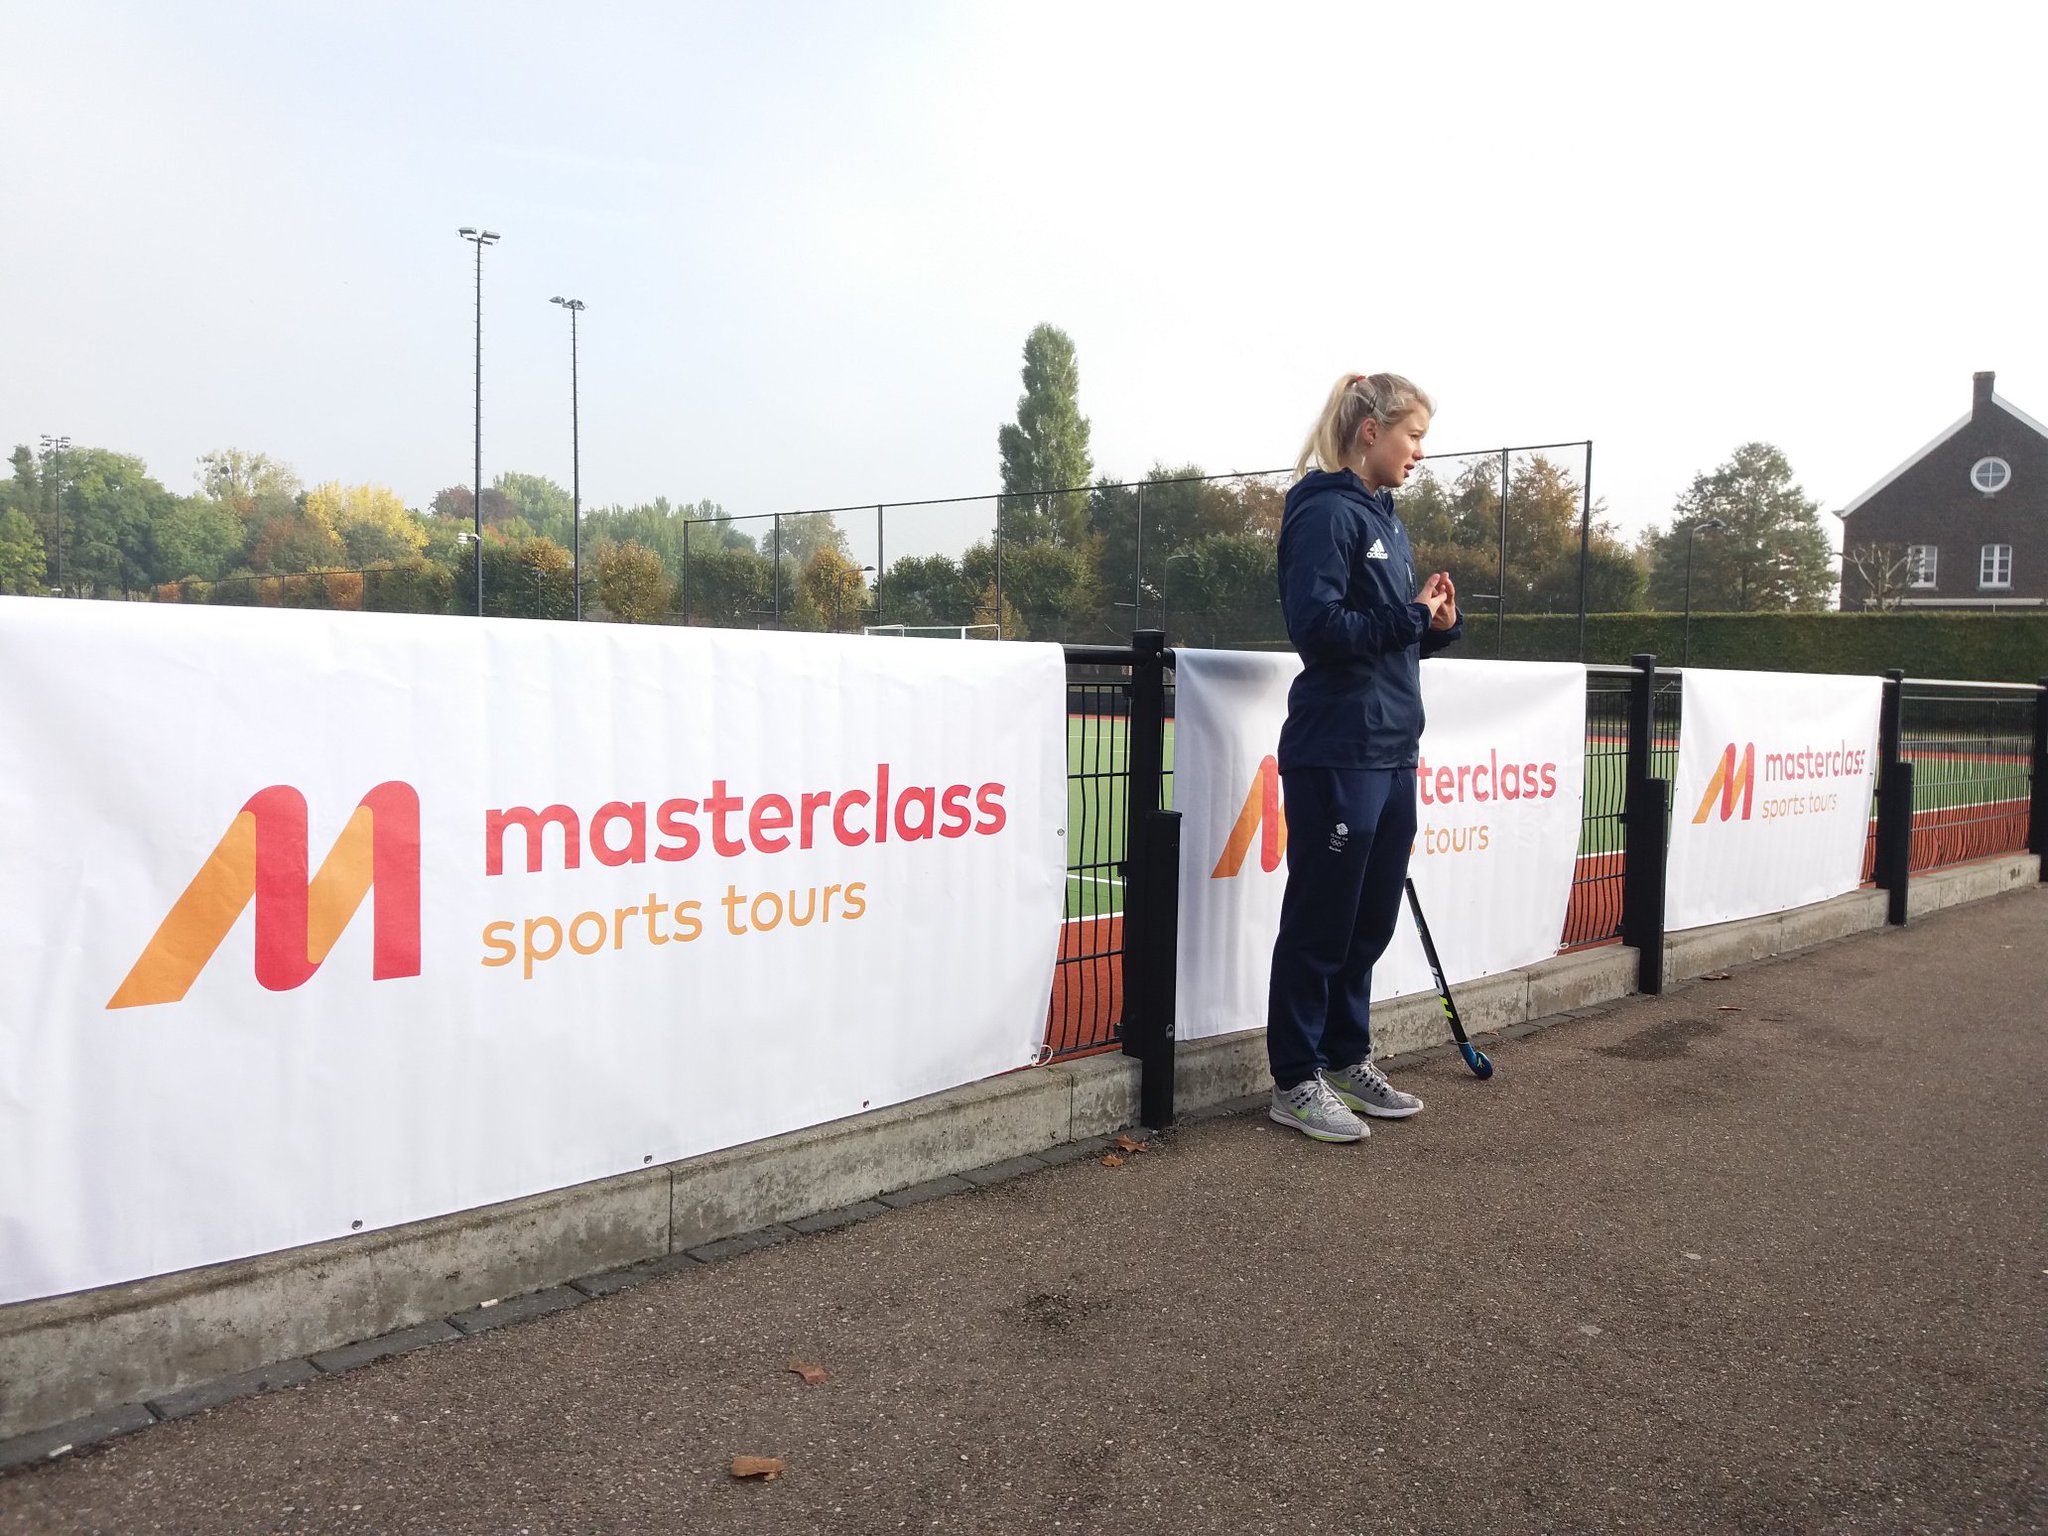 Olympic Gold Medallist, Sophie Bray supporting masterclass school sports tours